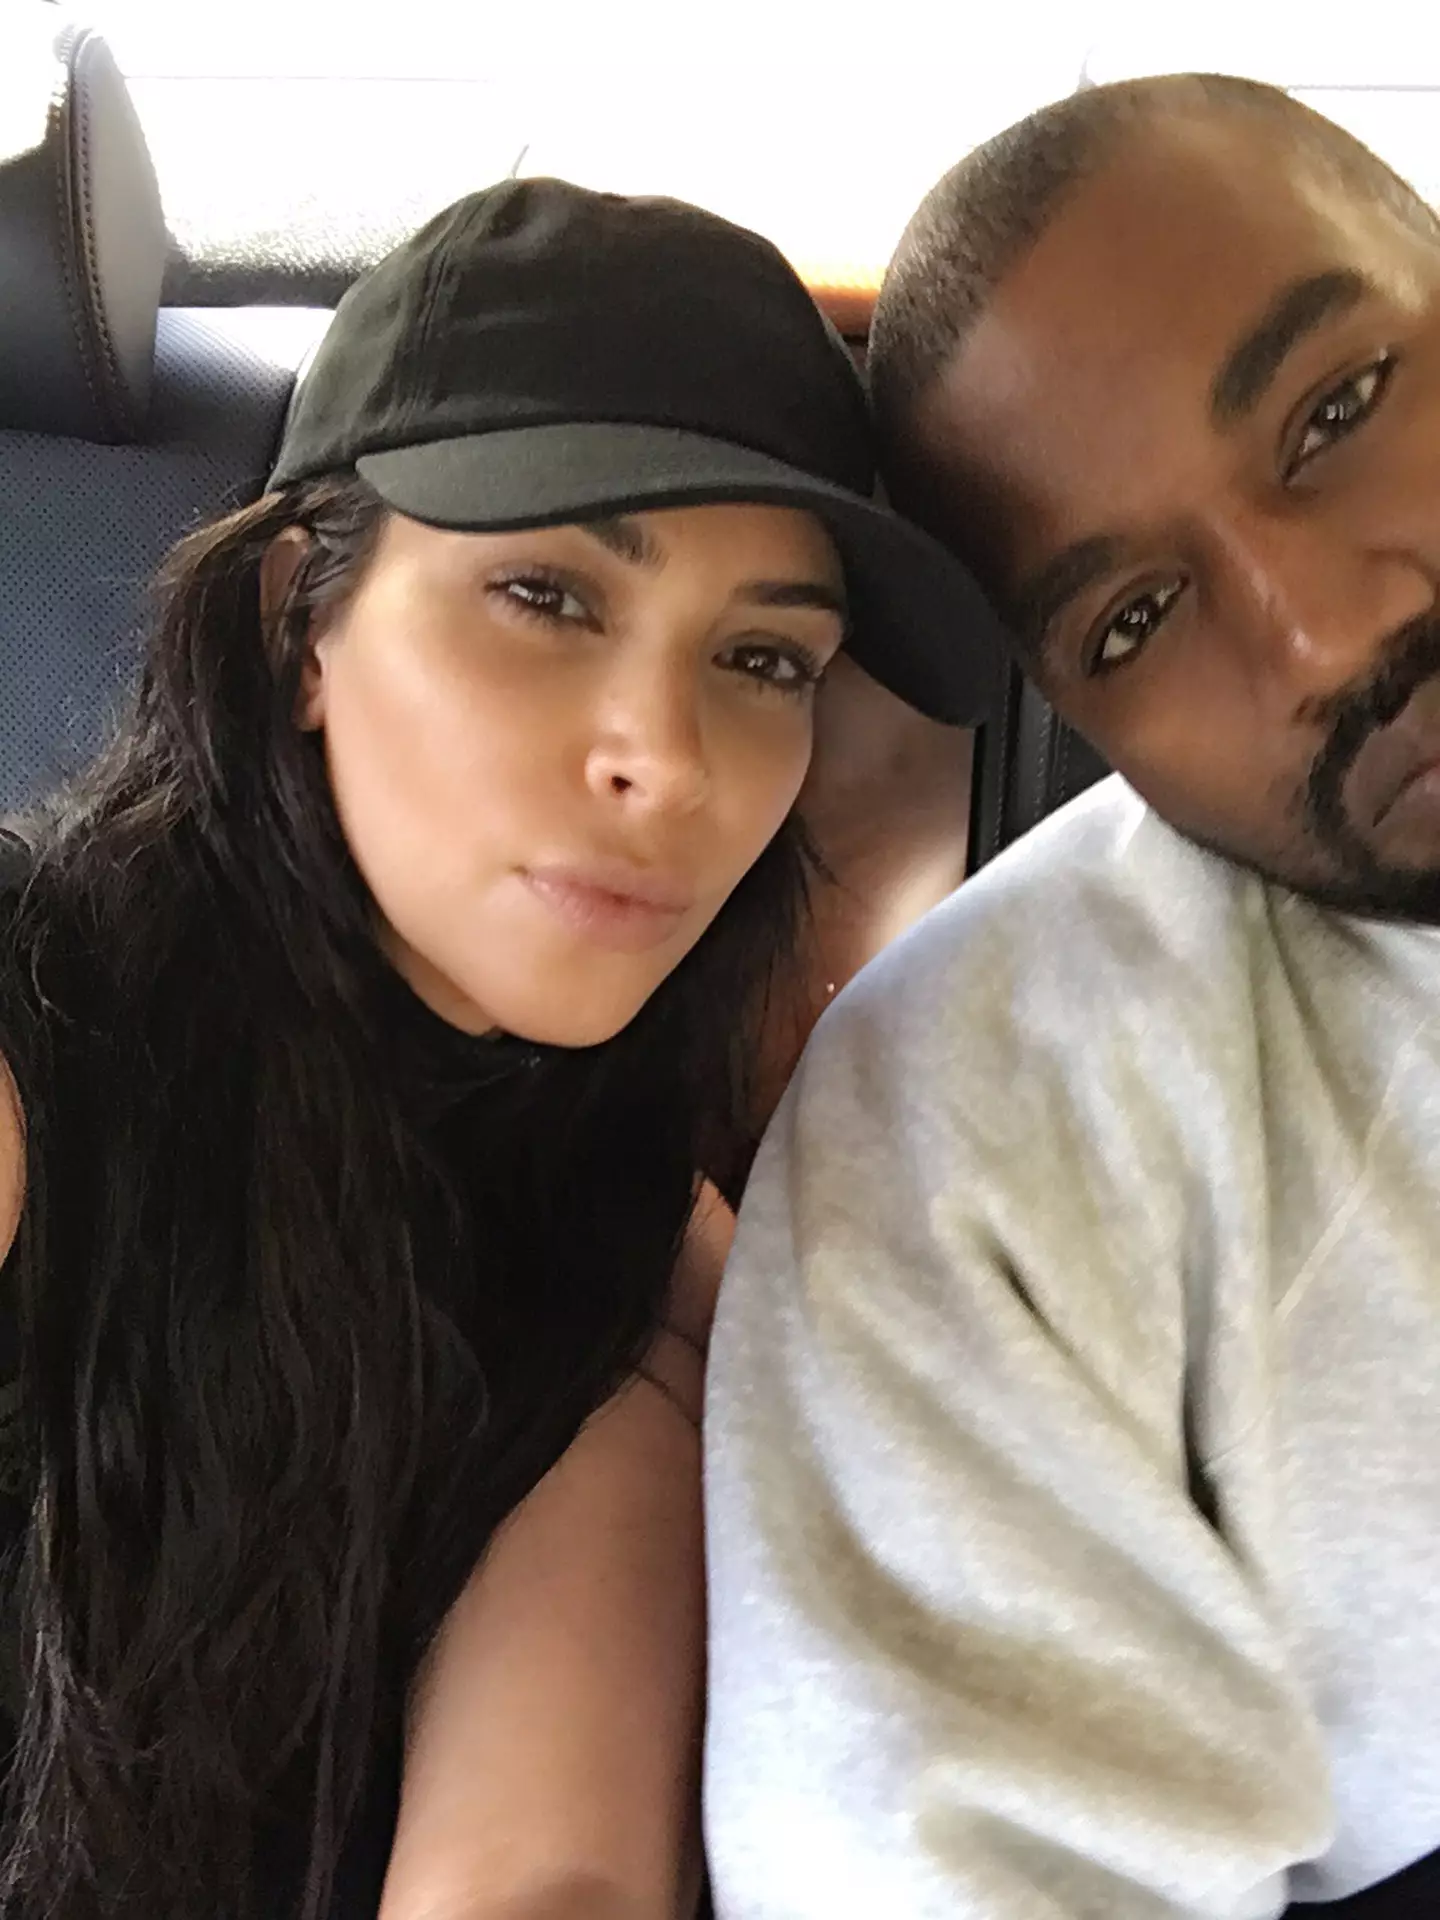 Kim and Kanye are going through a divorce (